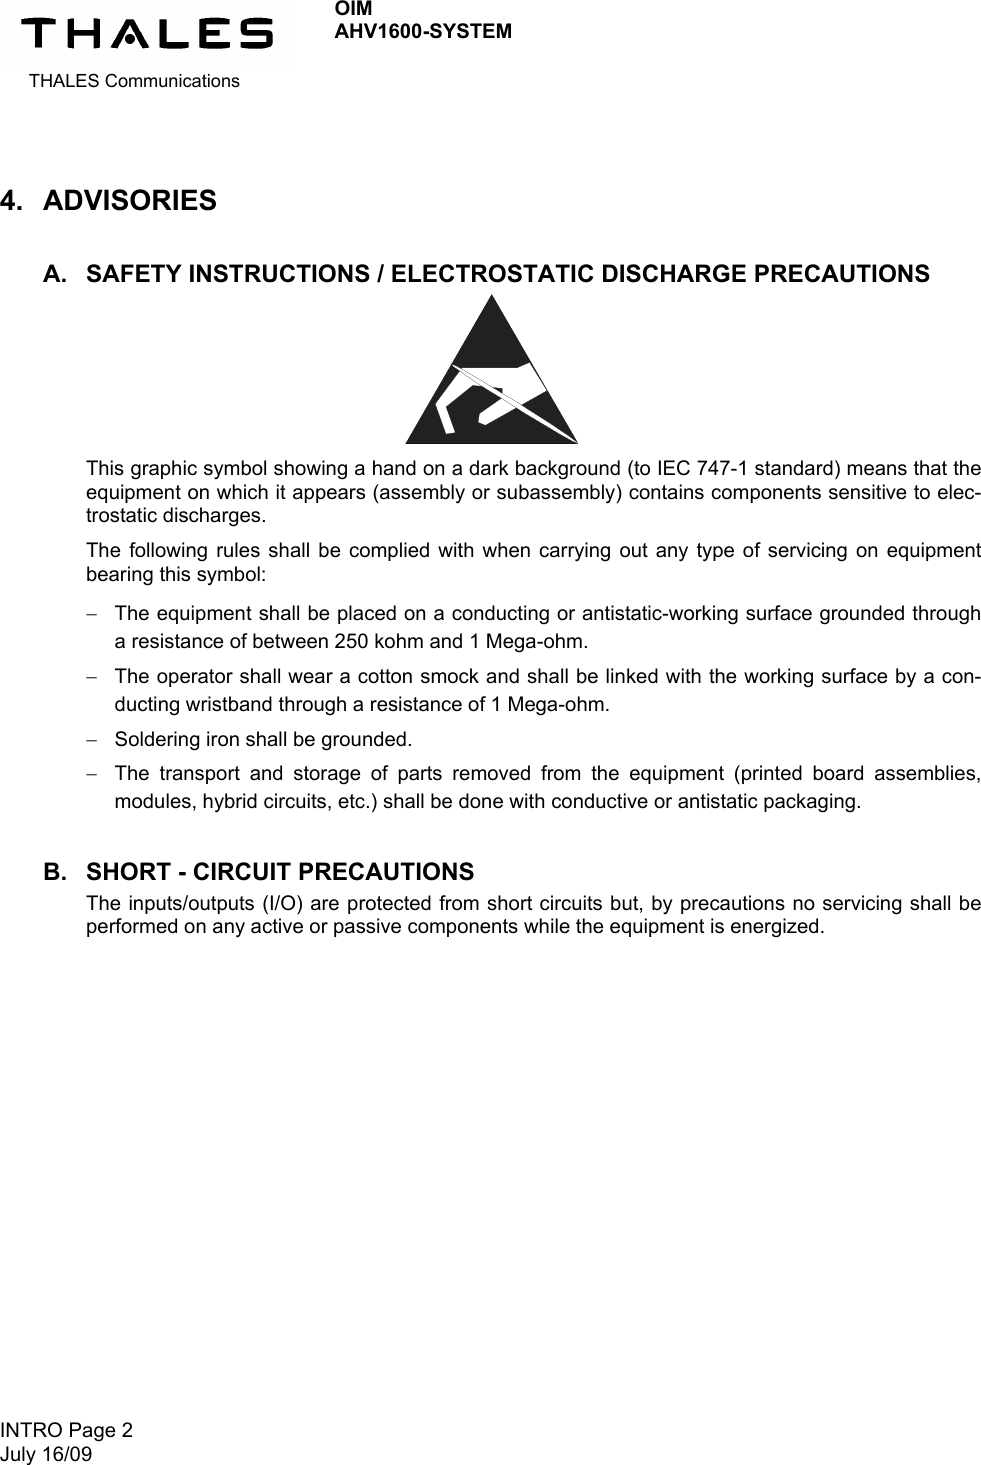  THALES Communications OIM AHV1600-SYSTEM   INTRO Page 2 July 16/09   4. ADVISORIES A.  SAFETY INSTRUCTIONS / ELECTROSTATIC DISCHARGE PRECAUTIONS        This graphic symbol showing a hand on a dark background (to IEC 747-1 standard) means that the equipment on which it appears (assembly or subassembly) contains components sensitive to elec-trostatic discharges. The following rules shall be complied with when carrying out any type of servicing on equipment bearing this symbol:  The equipment shall be placed on a conducting or antistatic-working surface grounded through a resistance of between 250 kohm and 1 Mega-ohm.  The operator shall wear a cotton smock and shall be linked with the working surface by a con-ducting wristband through a resistance of 1 Mega-ohm.  Soldering iron shall be grounded.  The transport and storage of parts removed from the equipment (printed board assemblies, modules, hybrid circuits, etc.) shall be done with conductive or antistatic packaging. B.  SHORT - CIRCUIT PRECAUTIONS The inputs/outputs (I/O) are protected from short circuits but, by precautions no servicing shall be performed on any active or passive components while the equipment is energized.  